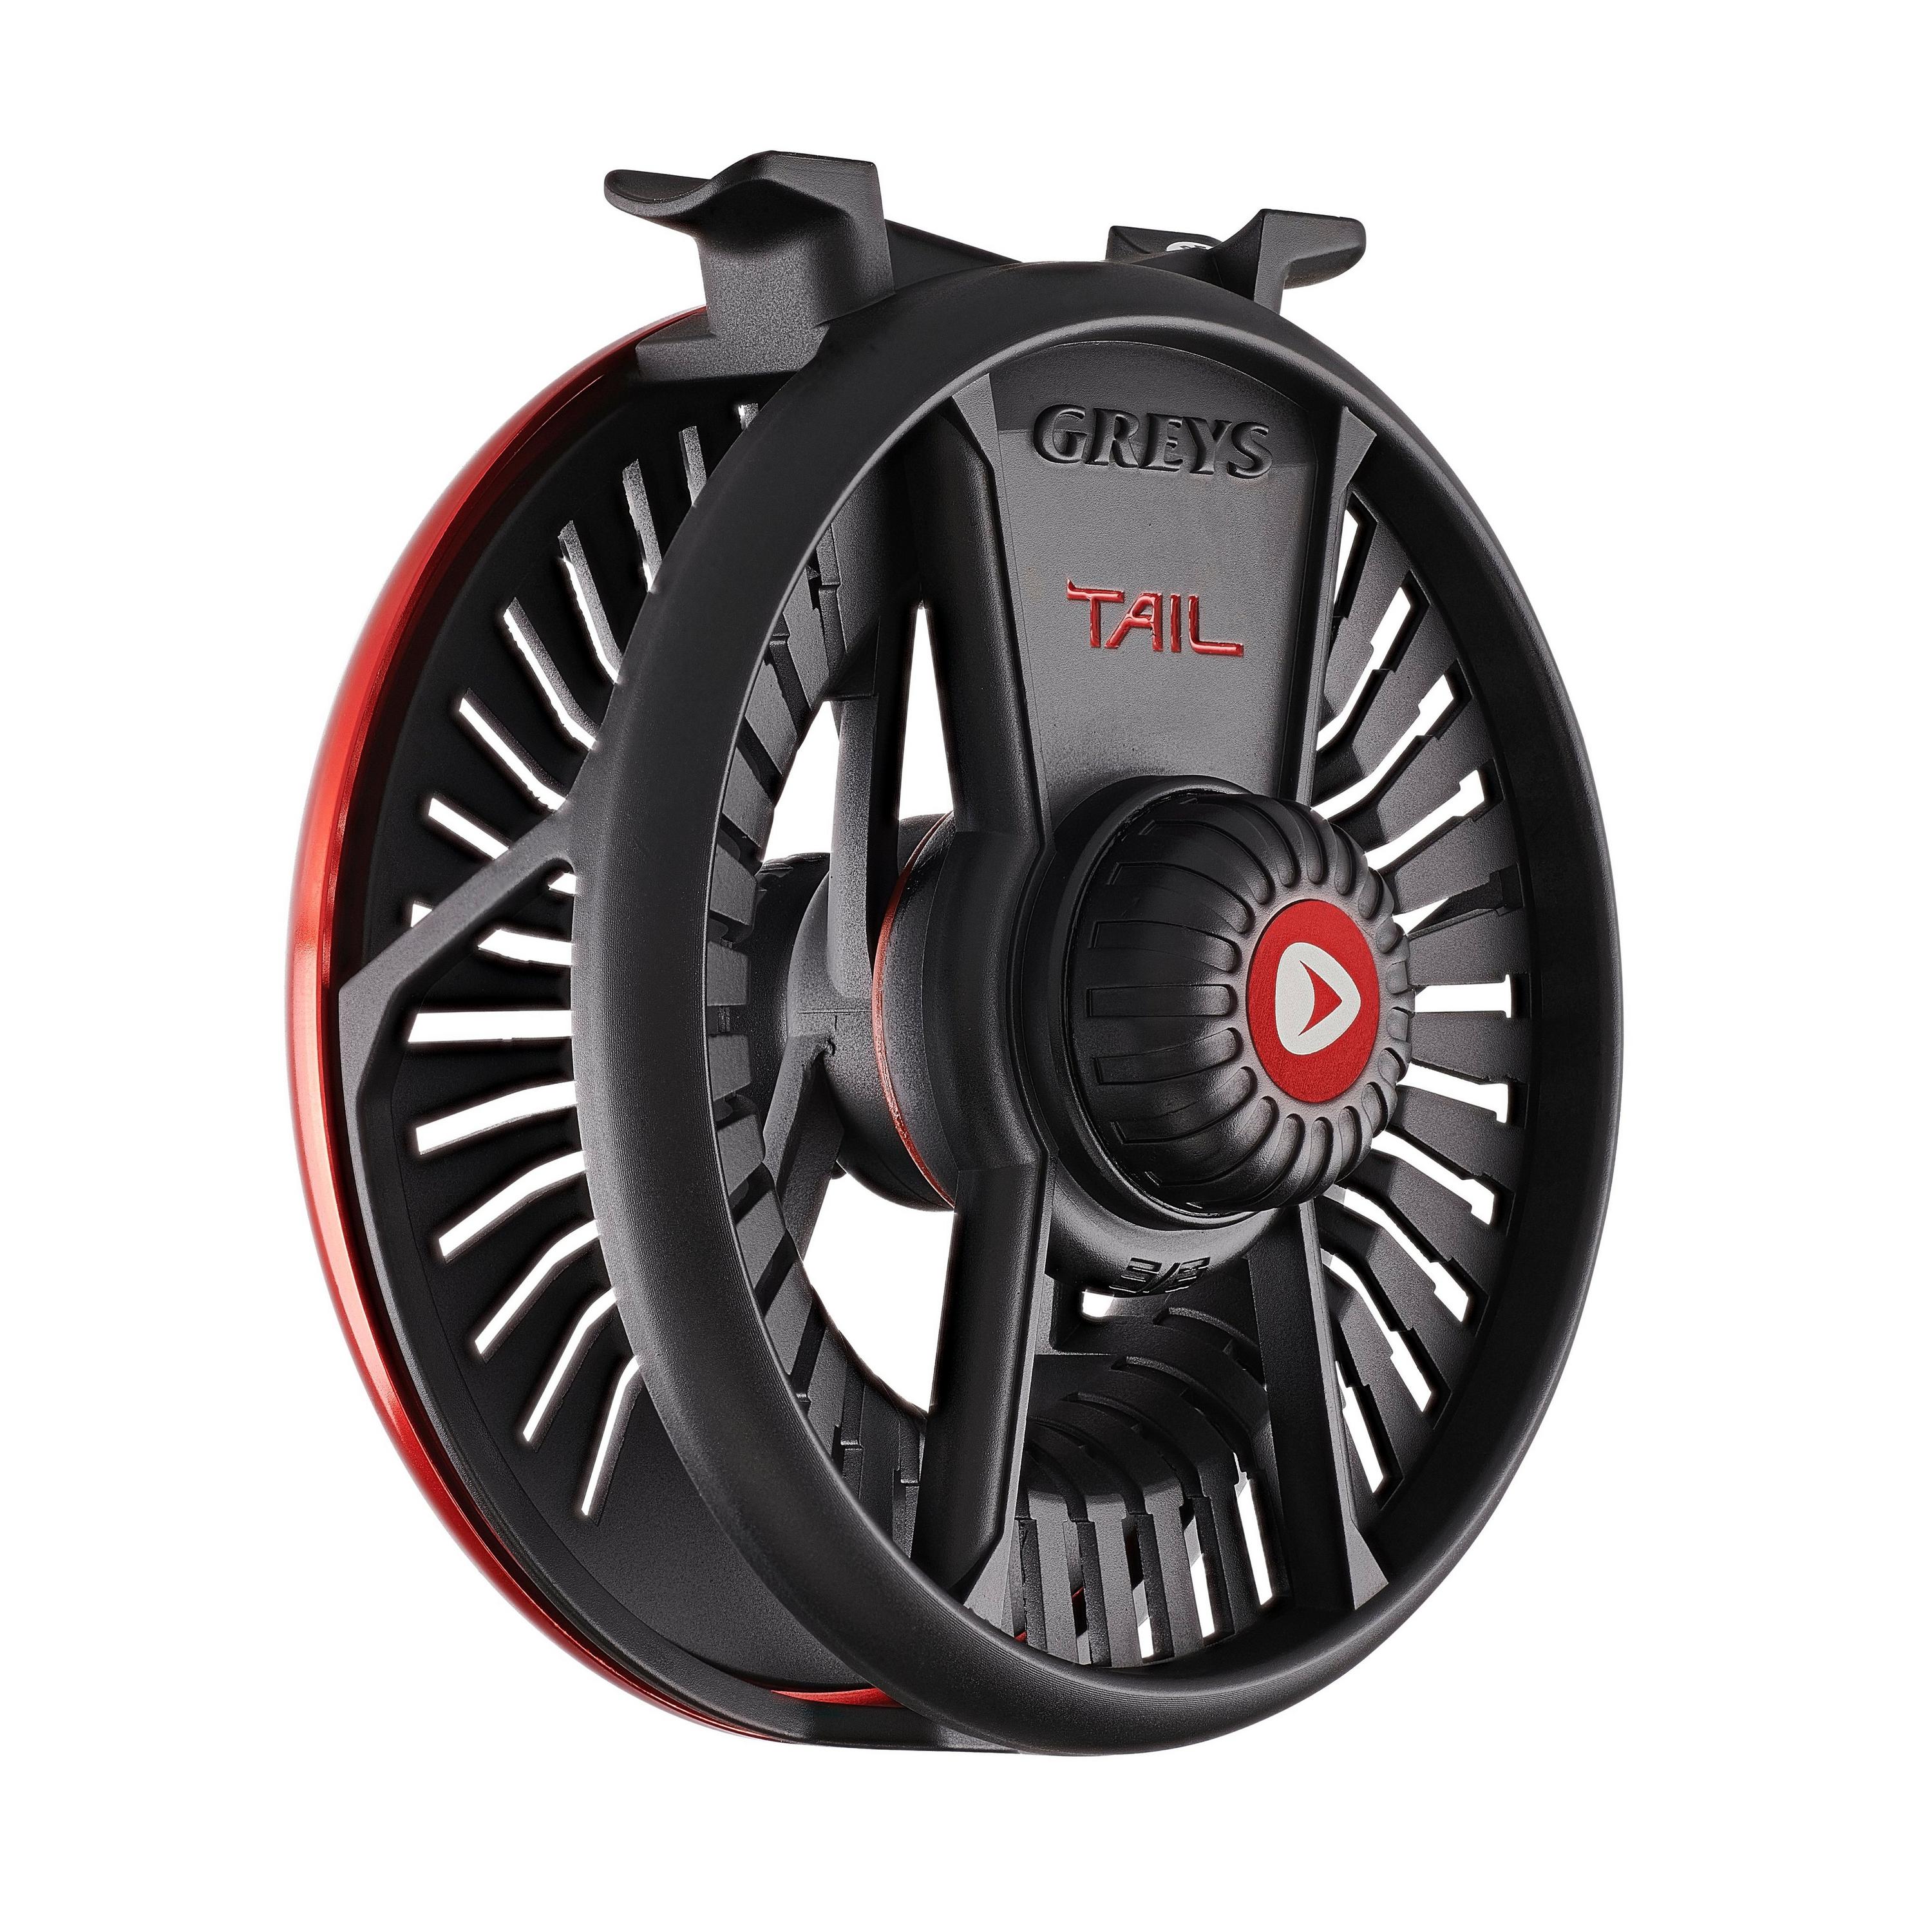 GREYS TAIL FLY REEL